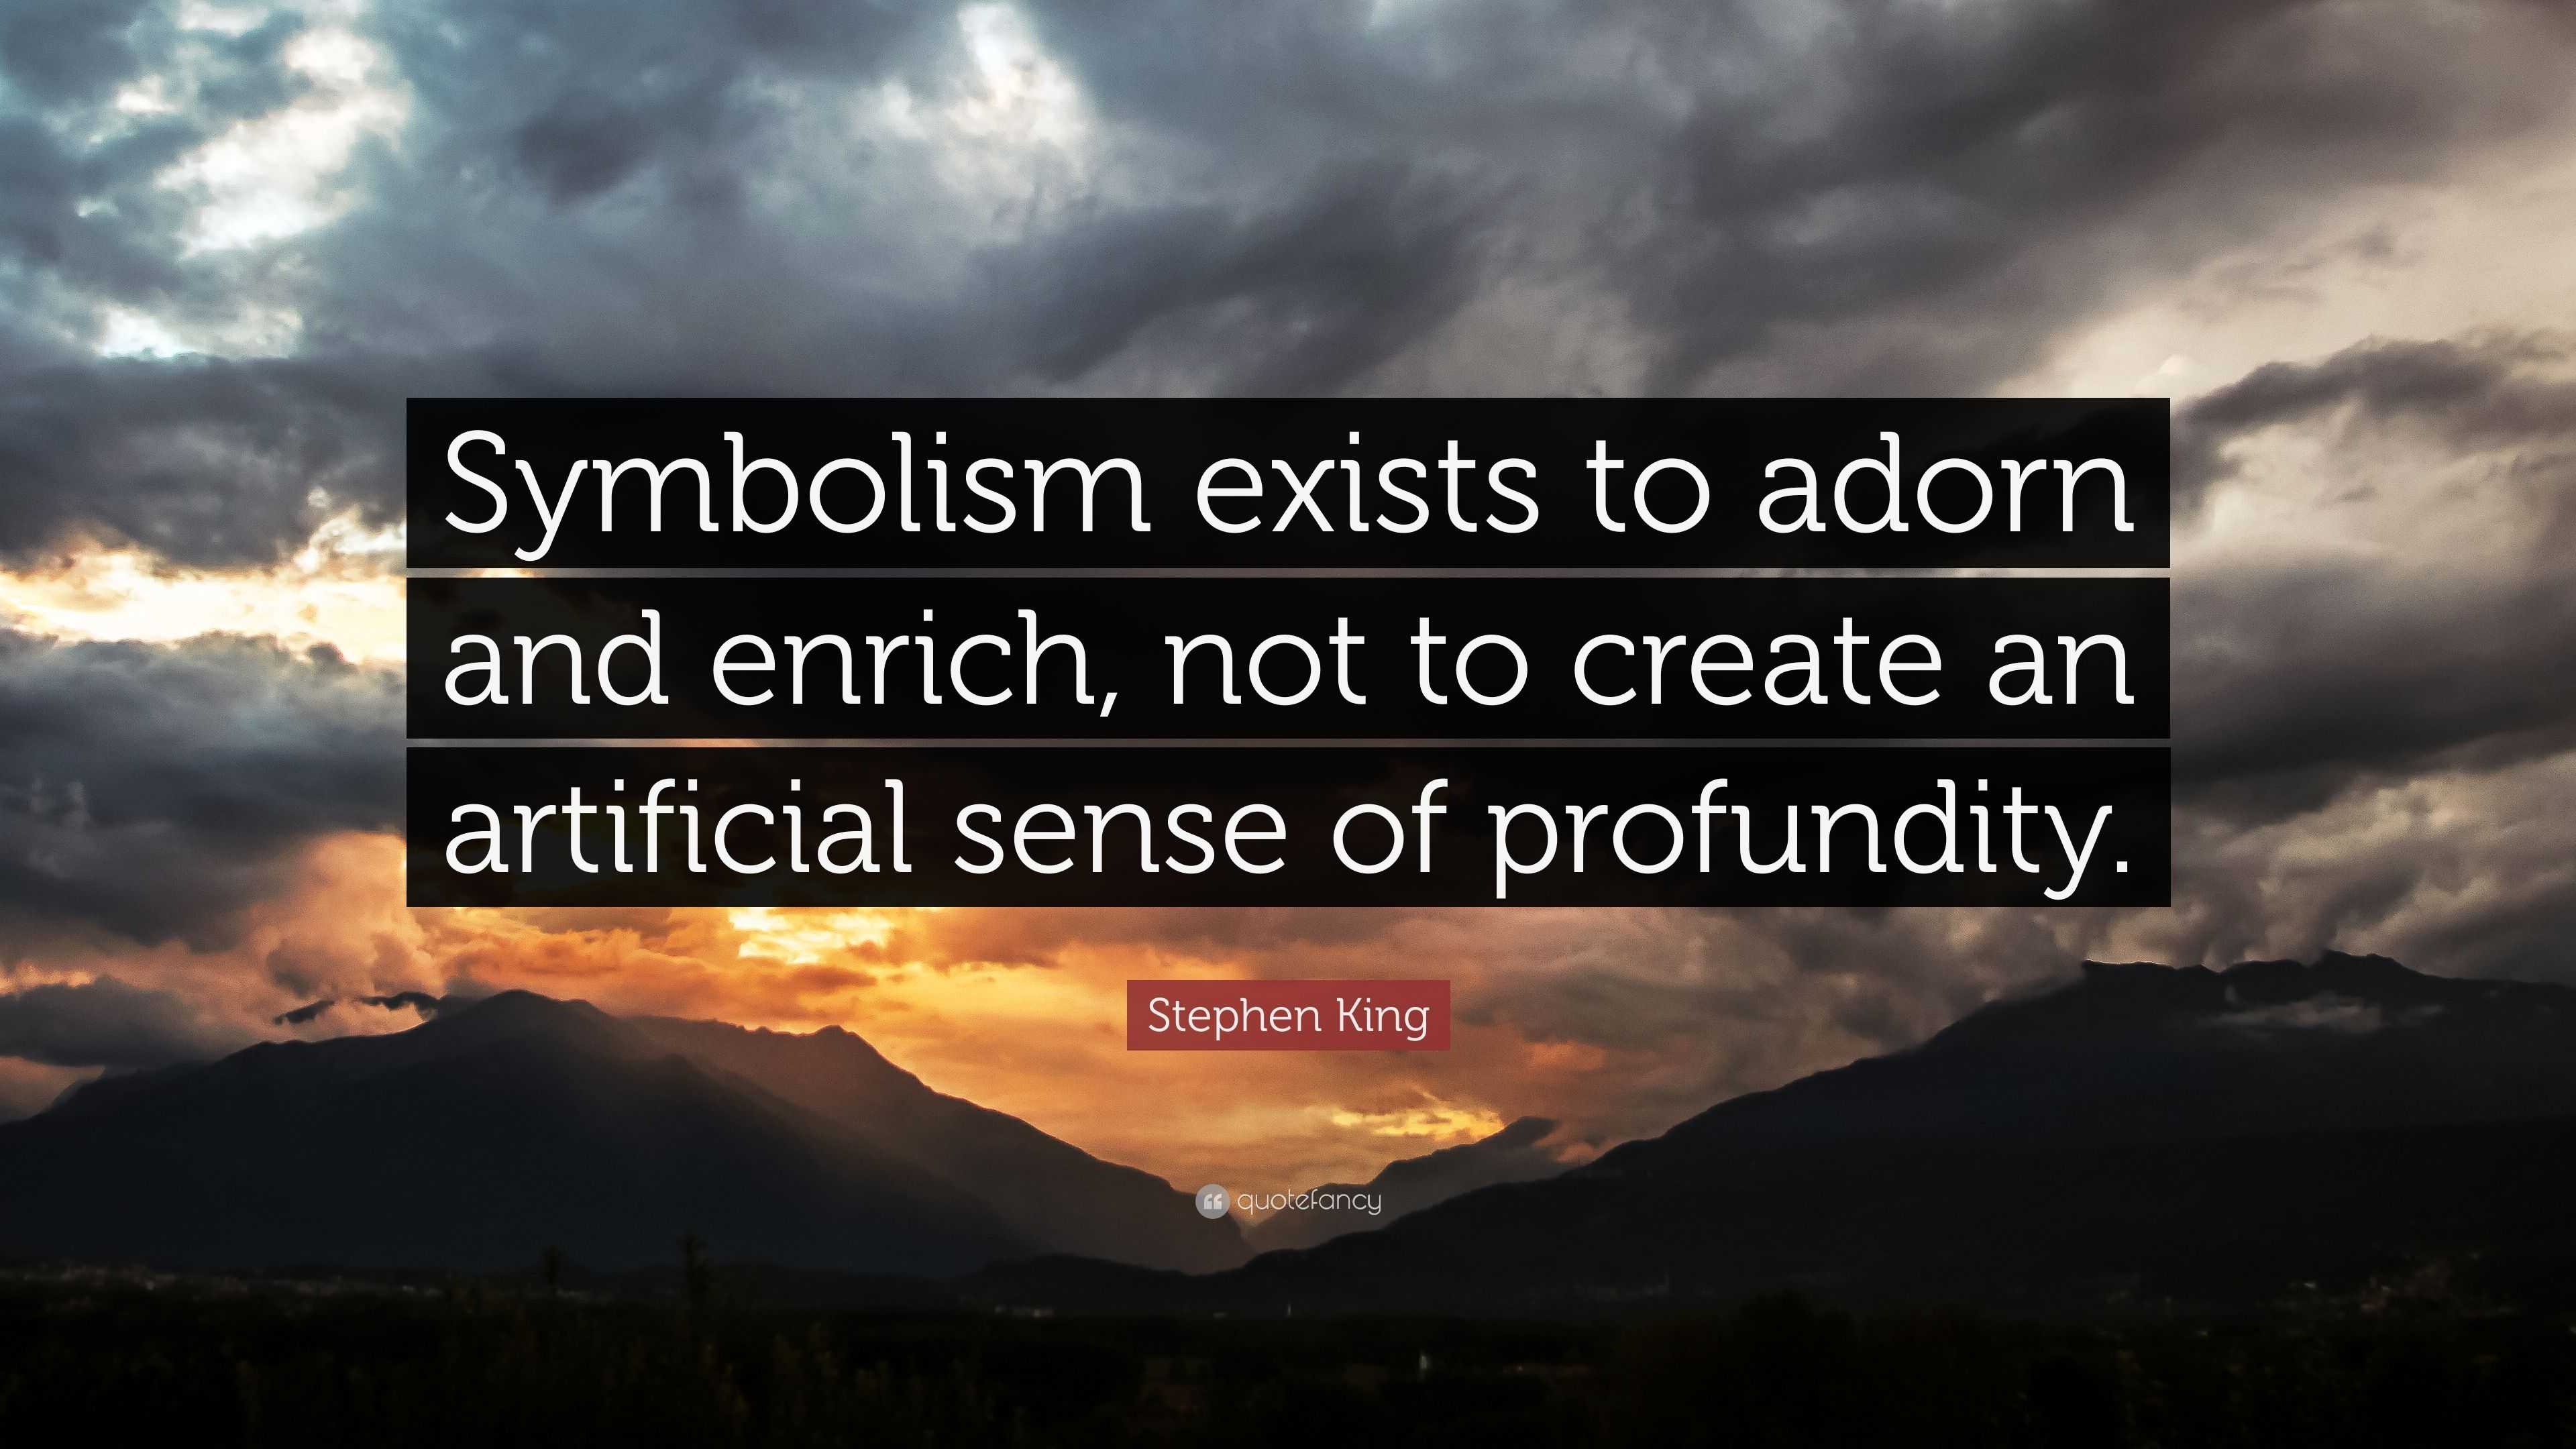 Stephen King Quote “Symbolism exists to adorn and enrich, not to